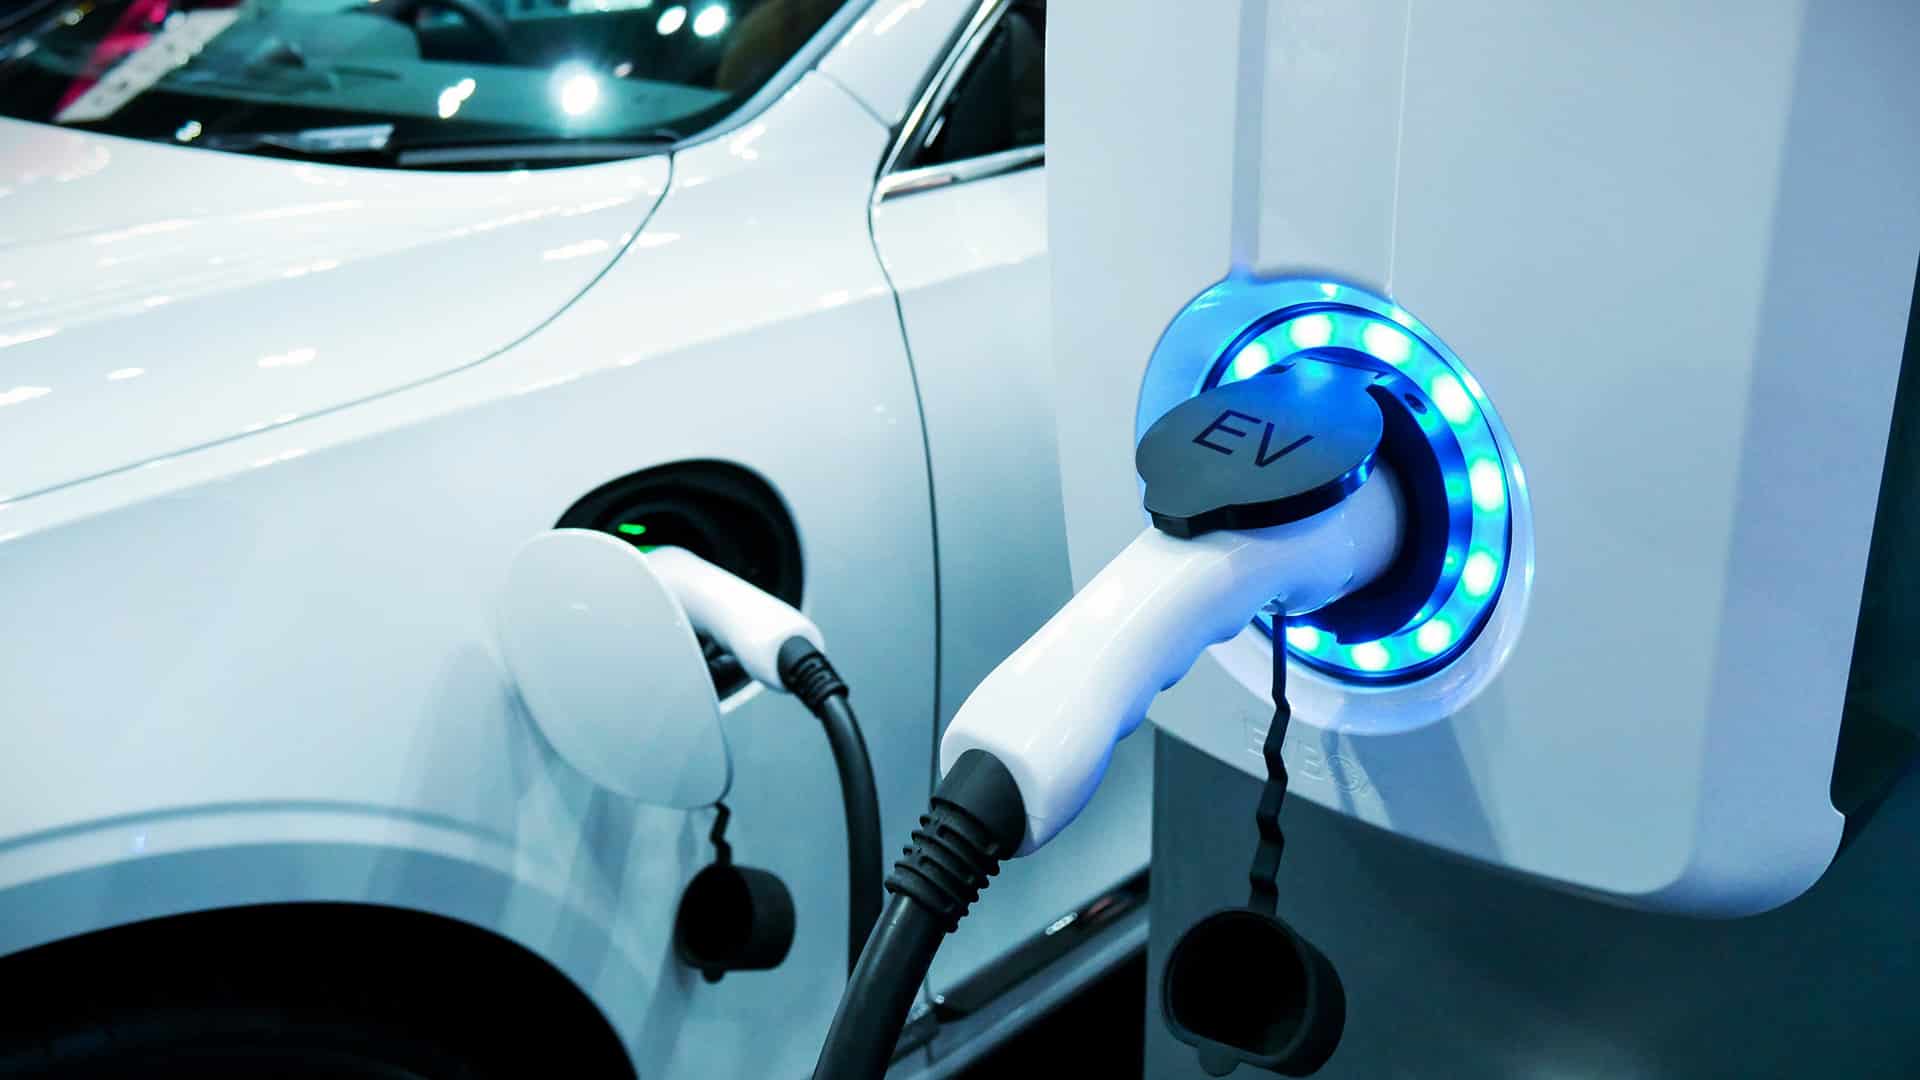 Homegrown Servotech Power Systems Ltd (SPSL) has inked a pact with Dubai-based Al Ansari Motors to provide electric vehicles charging solutions to the Middle Eastern and African markets